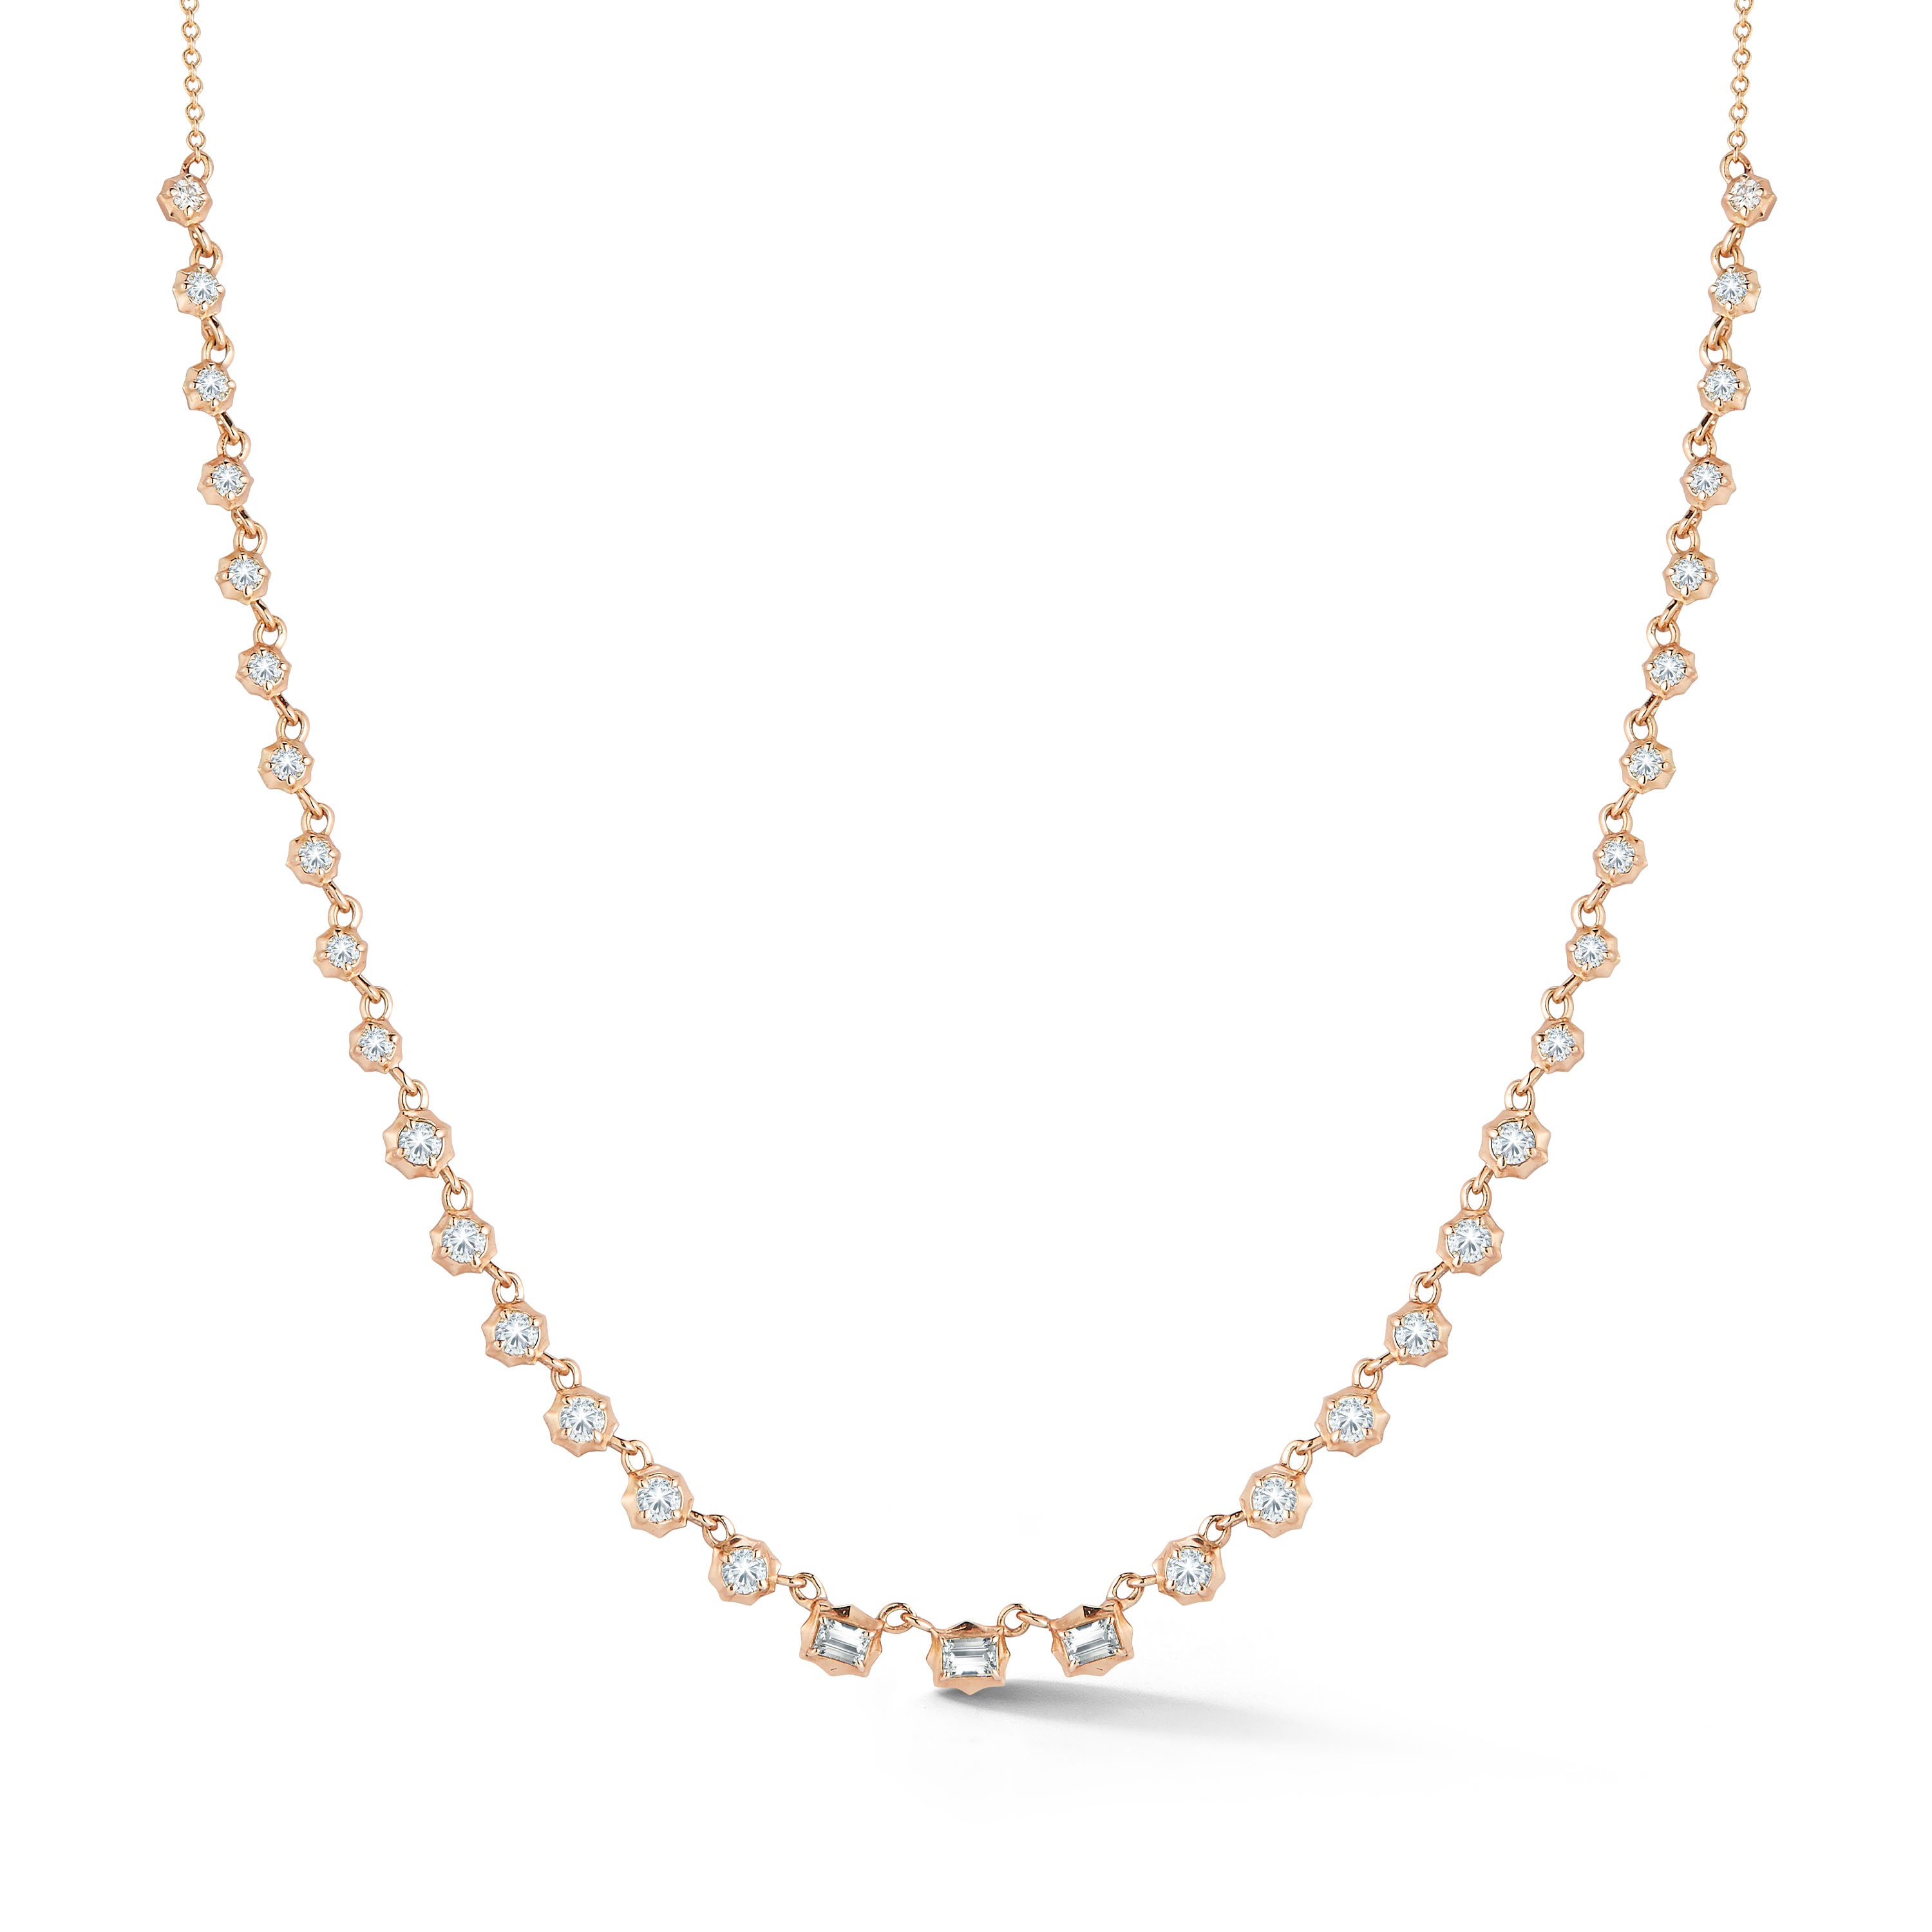 Small Vanguard Riviera Necklace in 18K Rose Gold